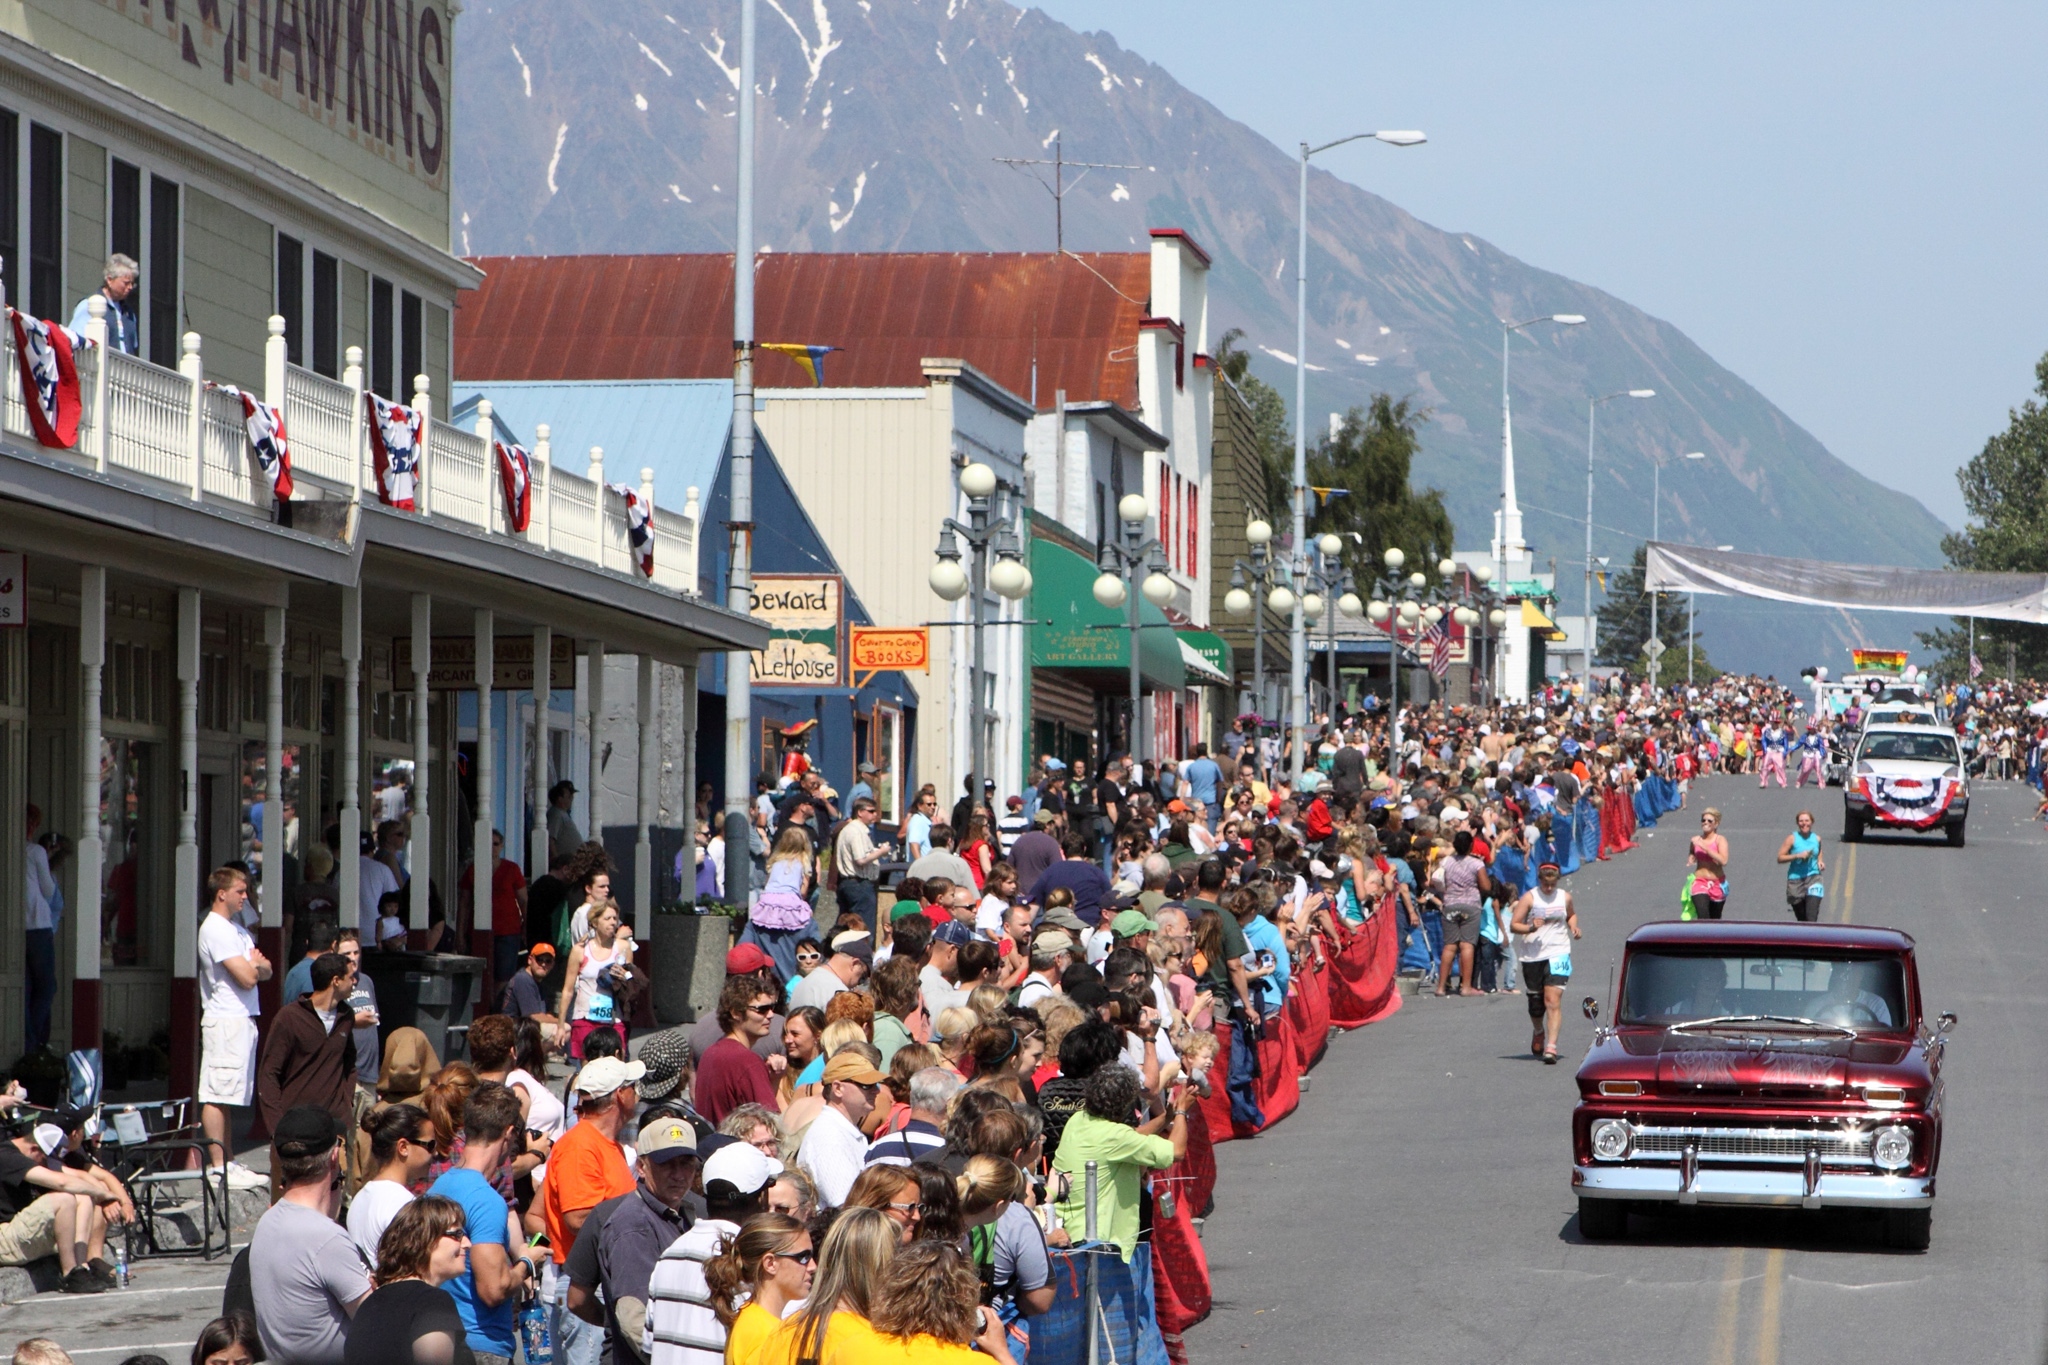 People lining the street for a 4th of July parade in Seward